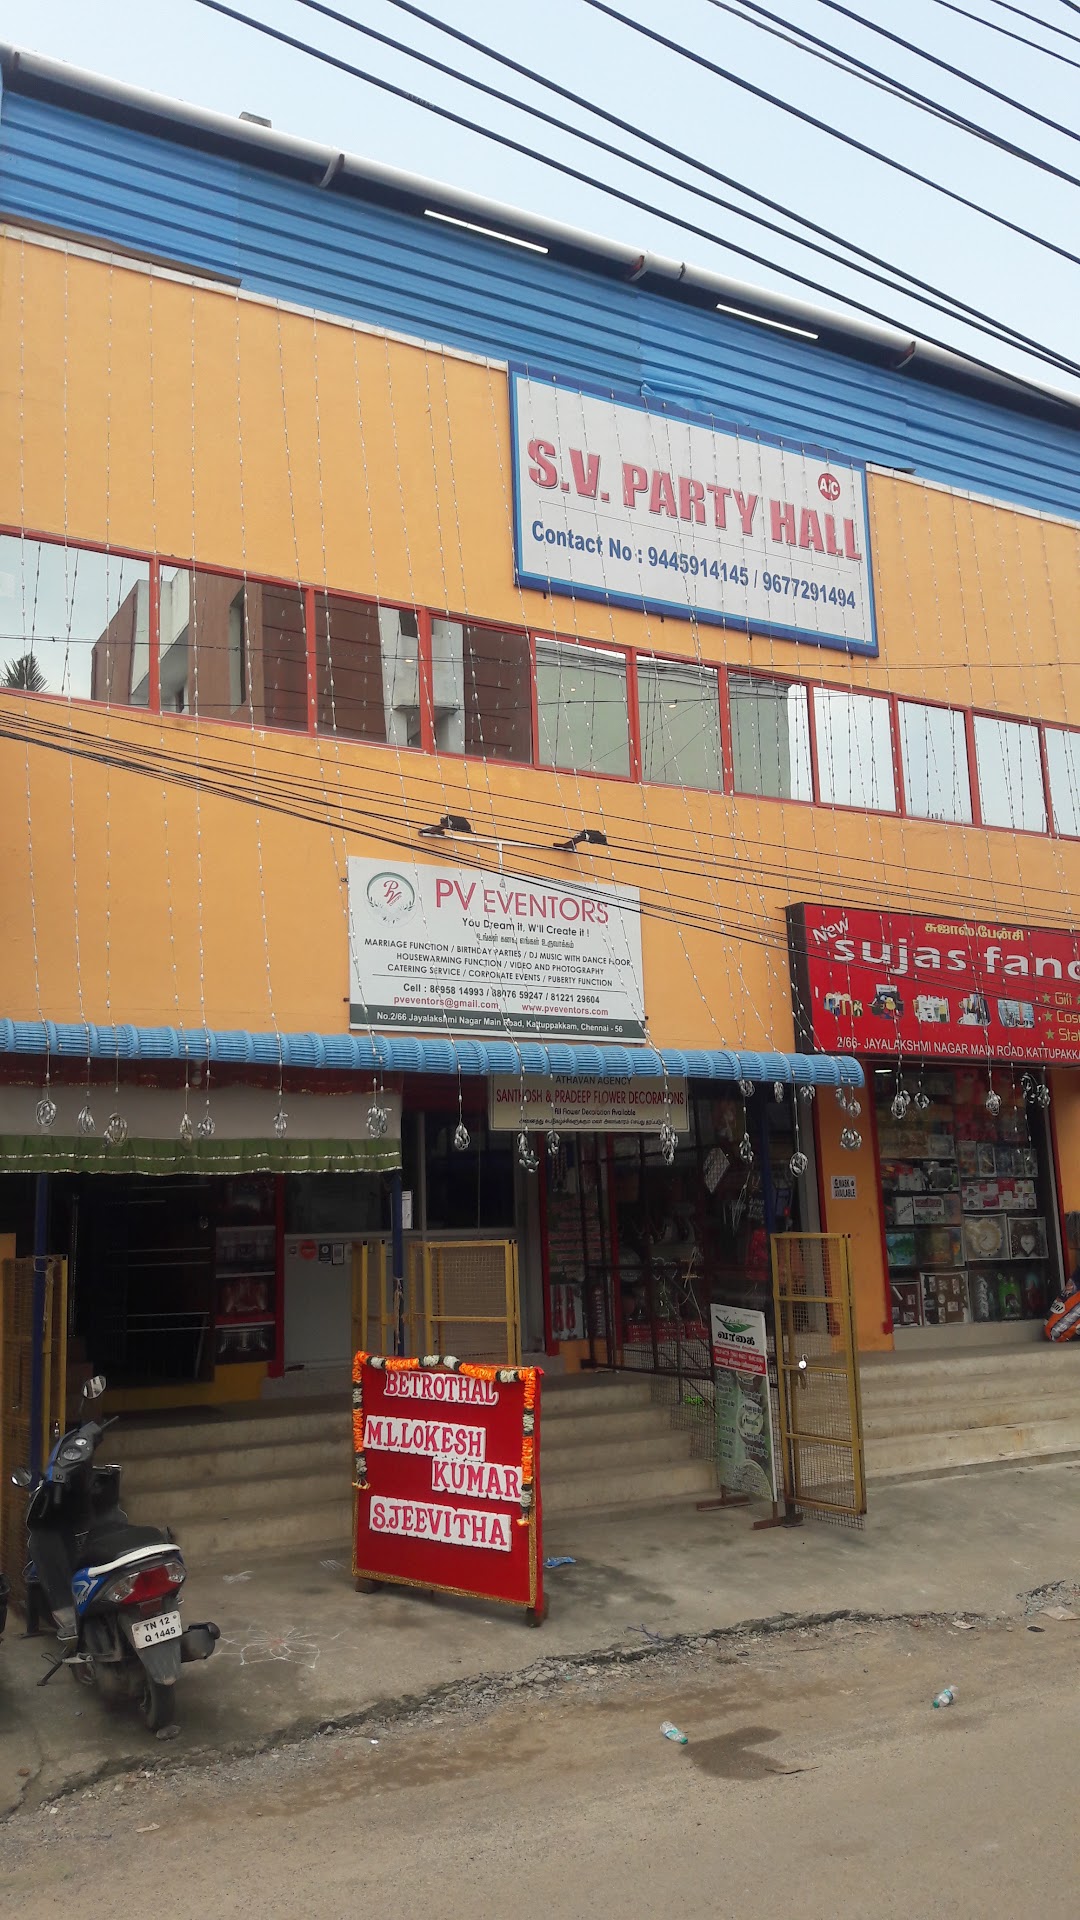 S.V PARTY HALL A/C